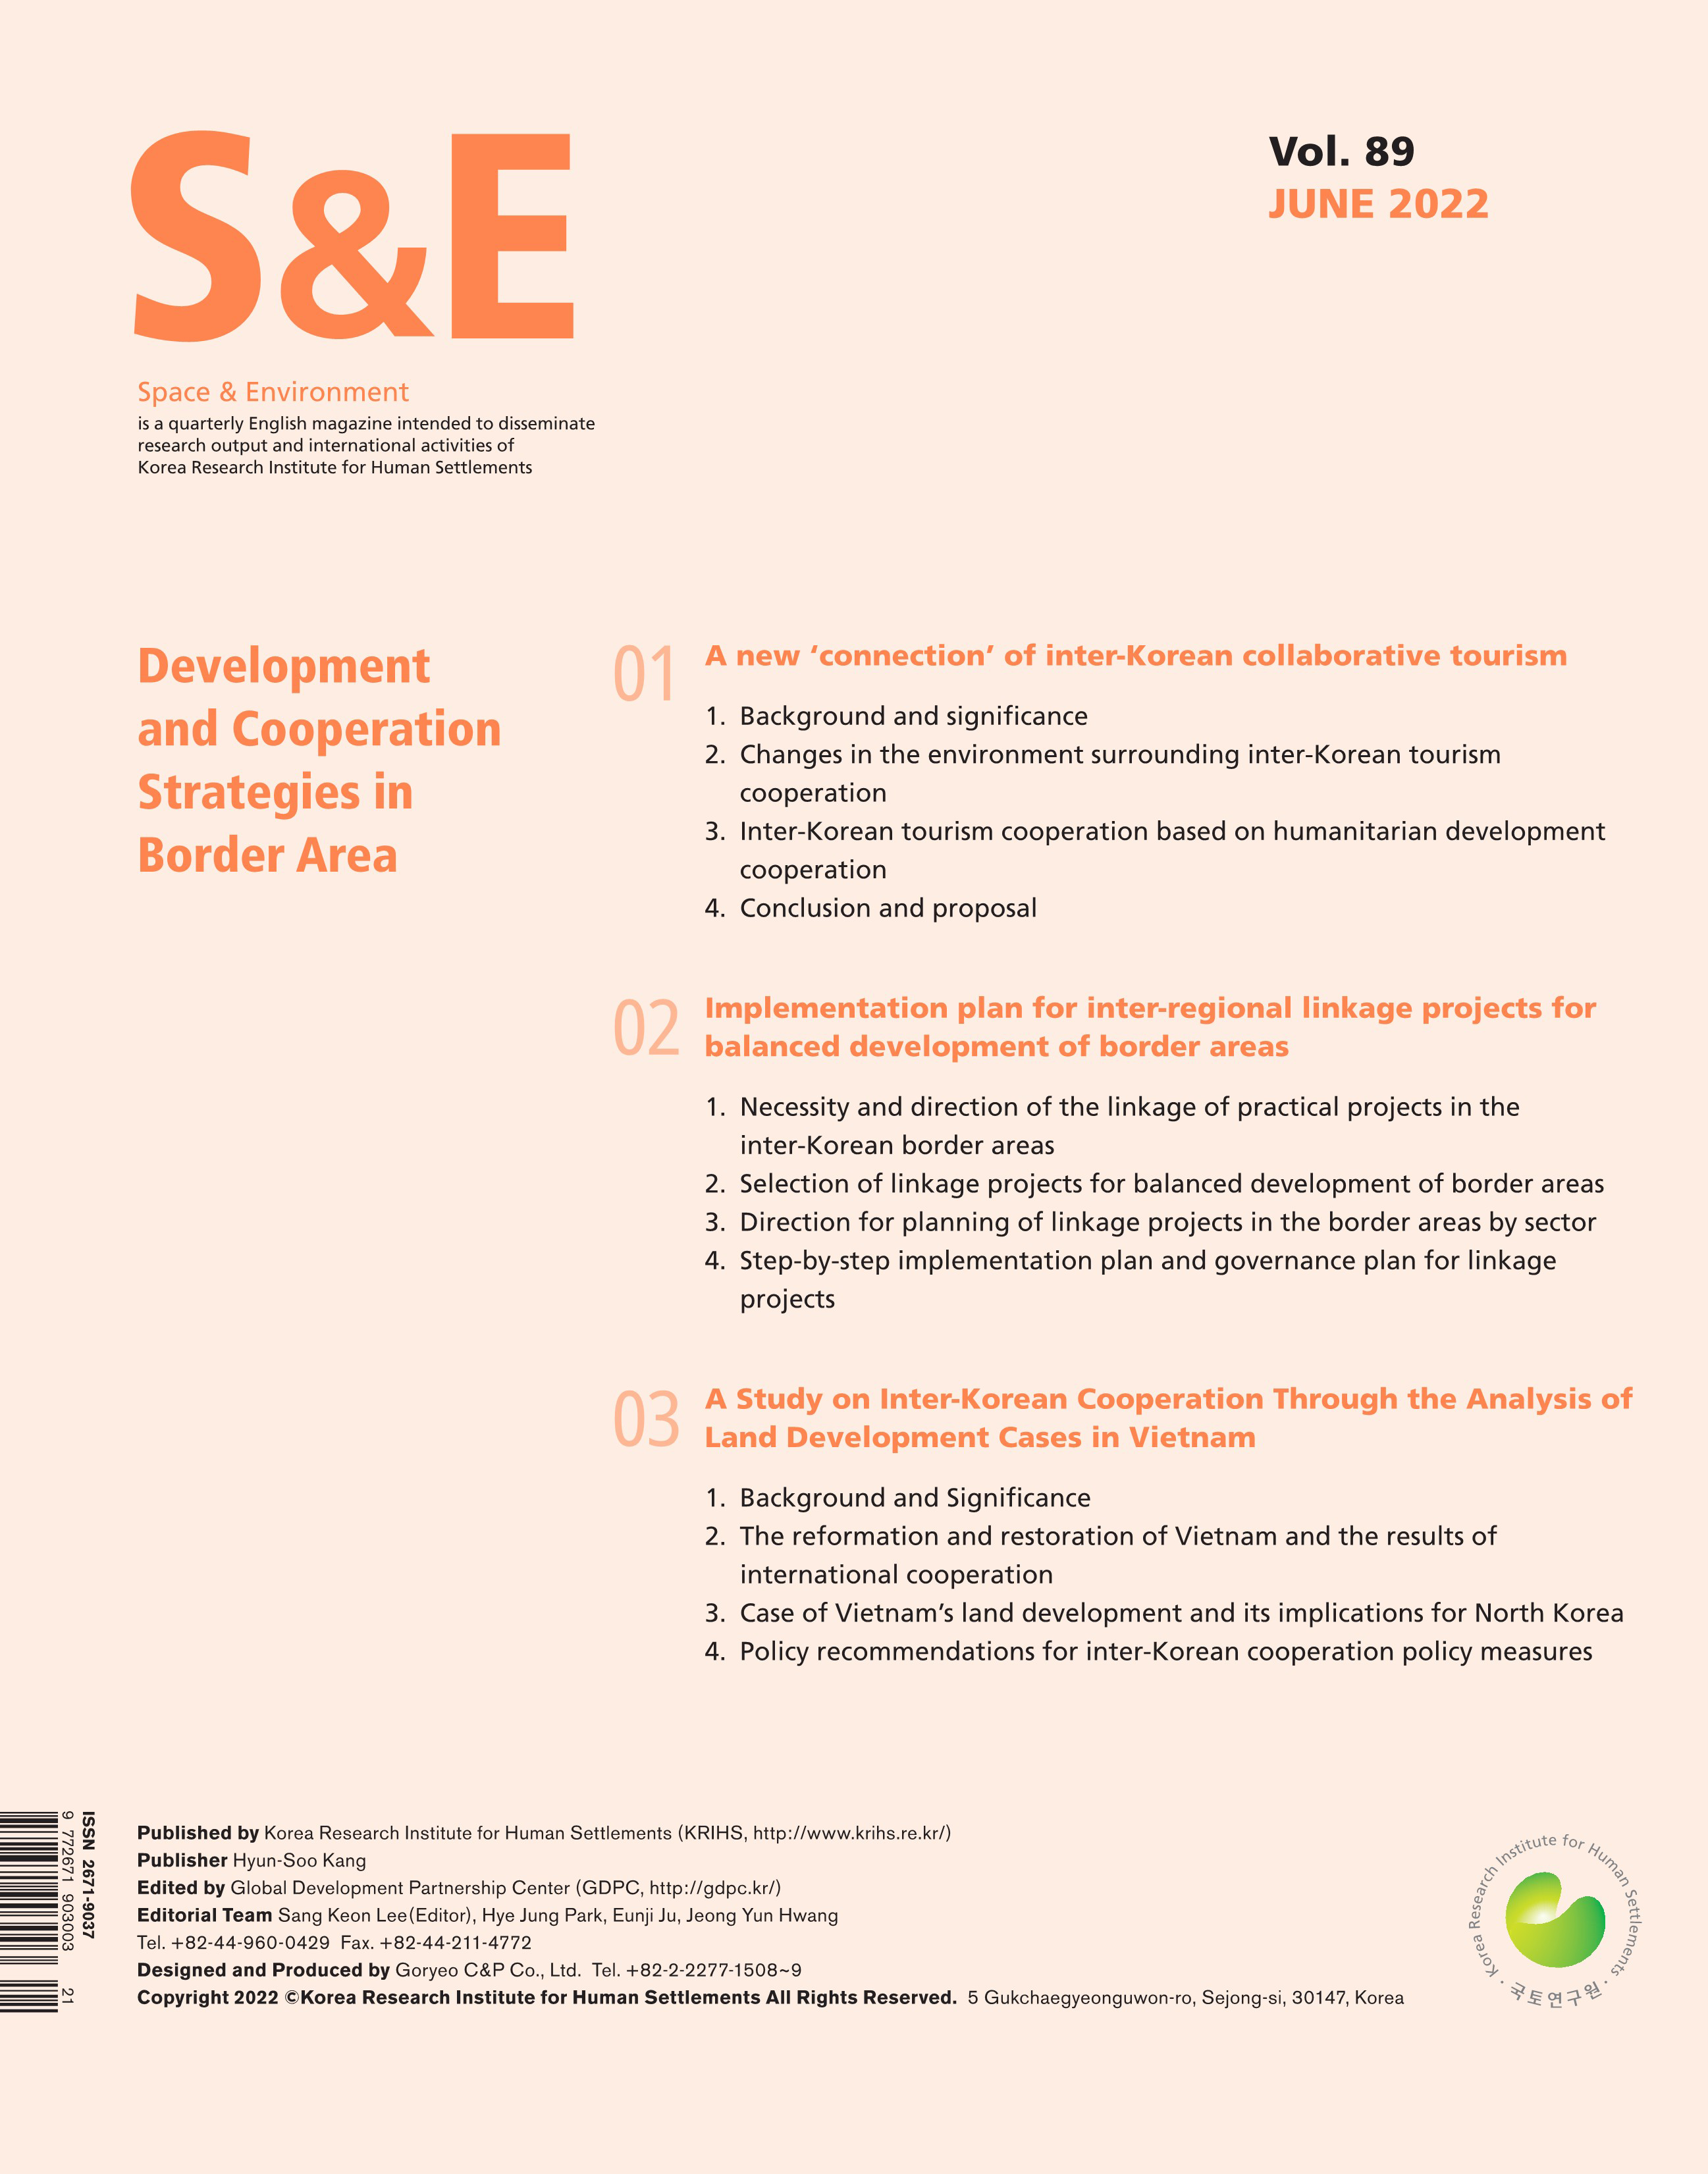 SPACE & ENVIRONMENT VOL. 89 (JUNE 2022)
Development and Cooperation Strategies in Border Area